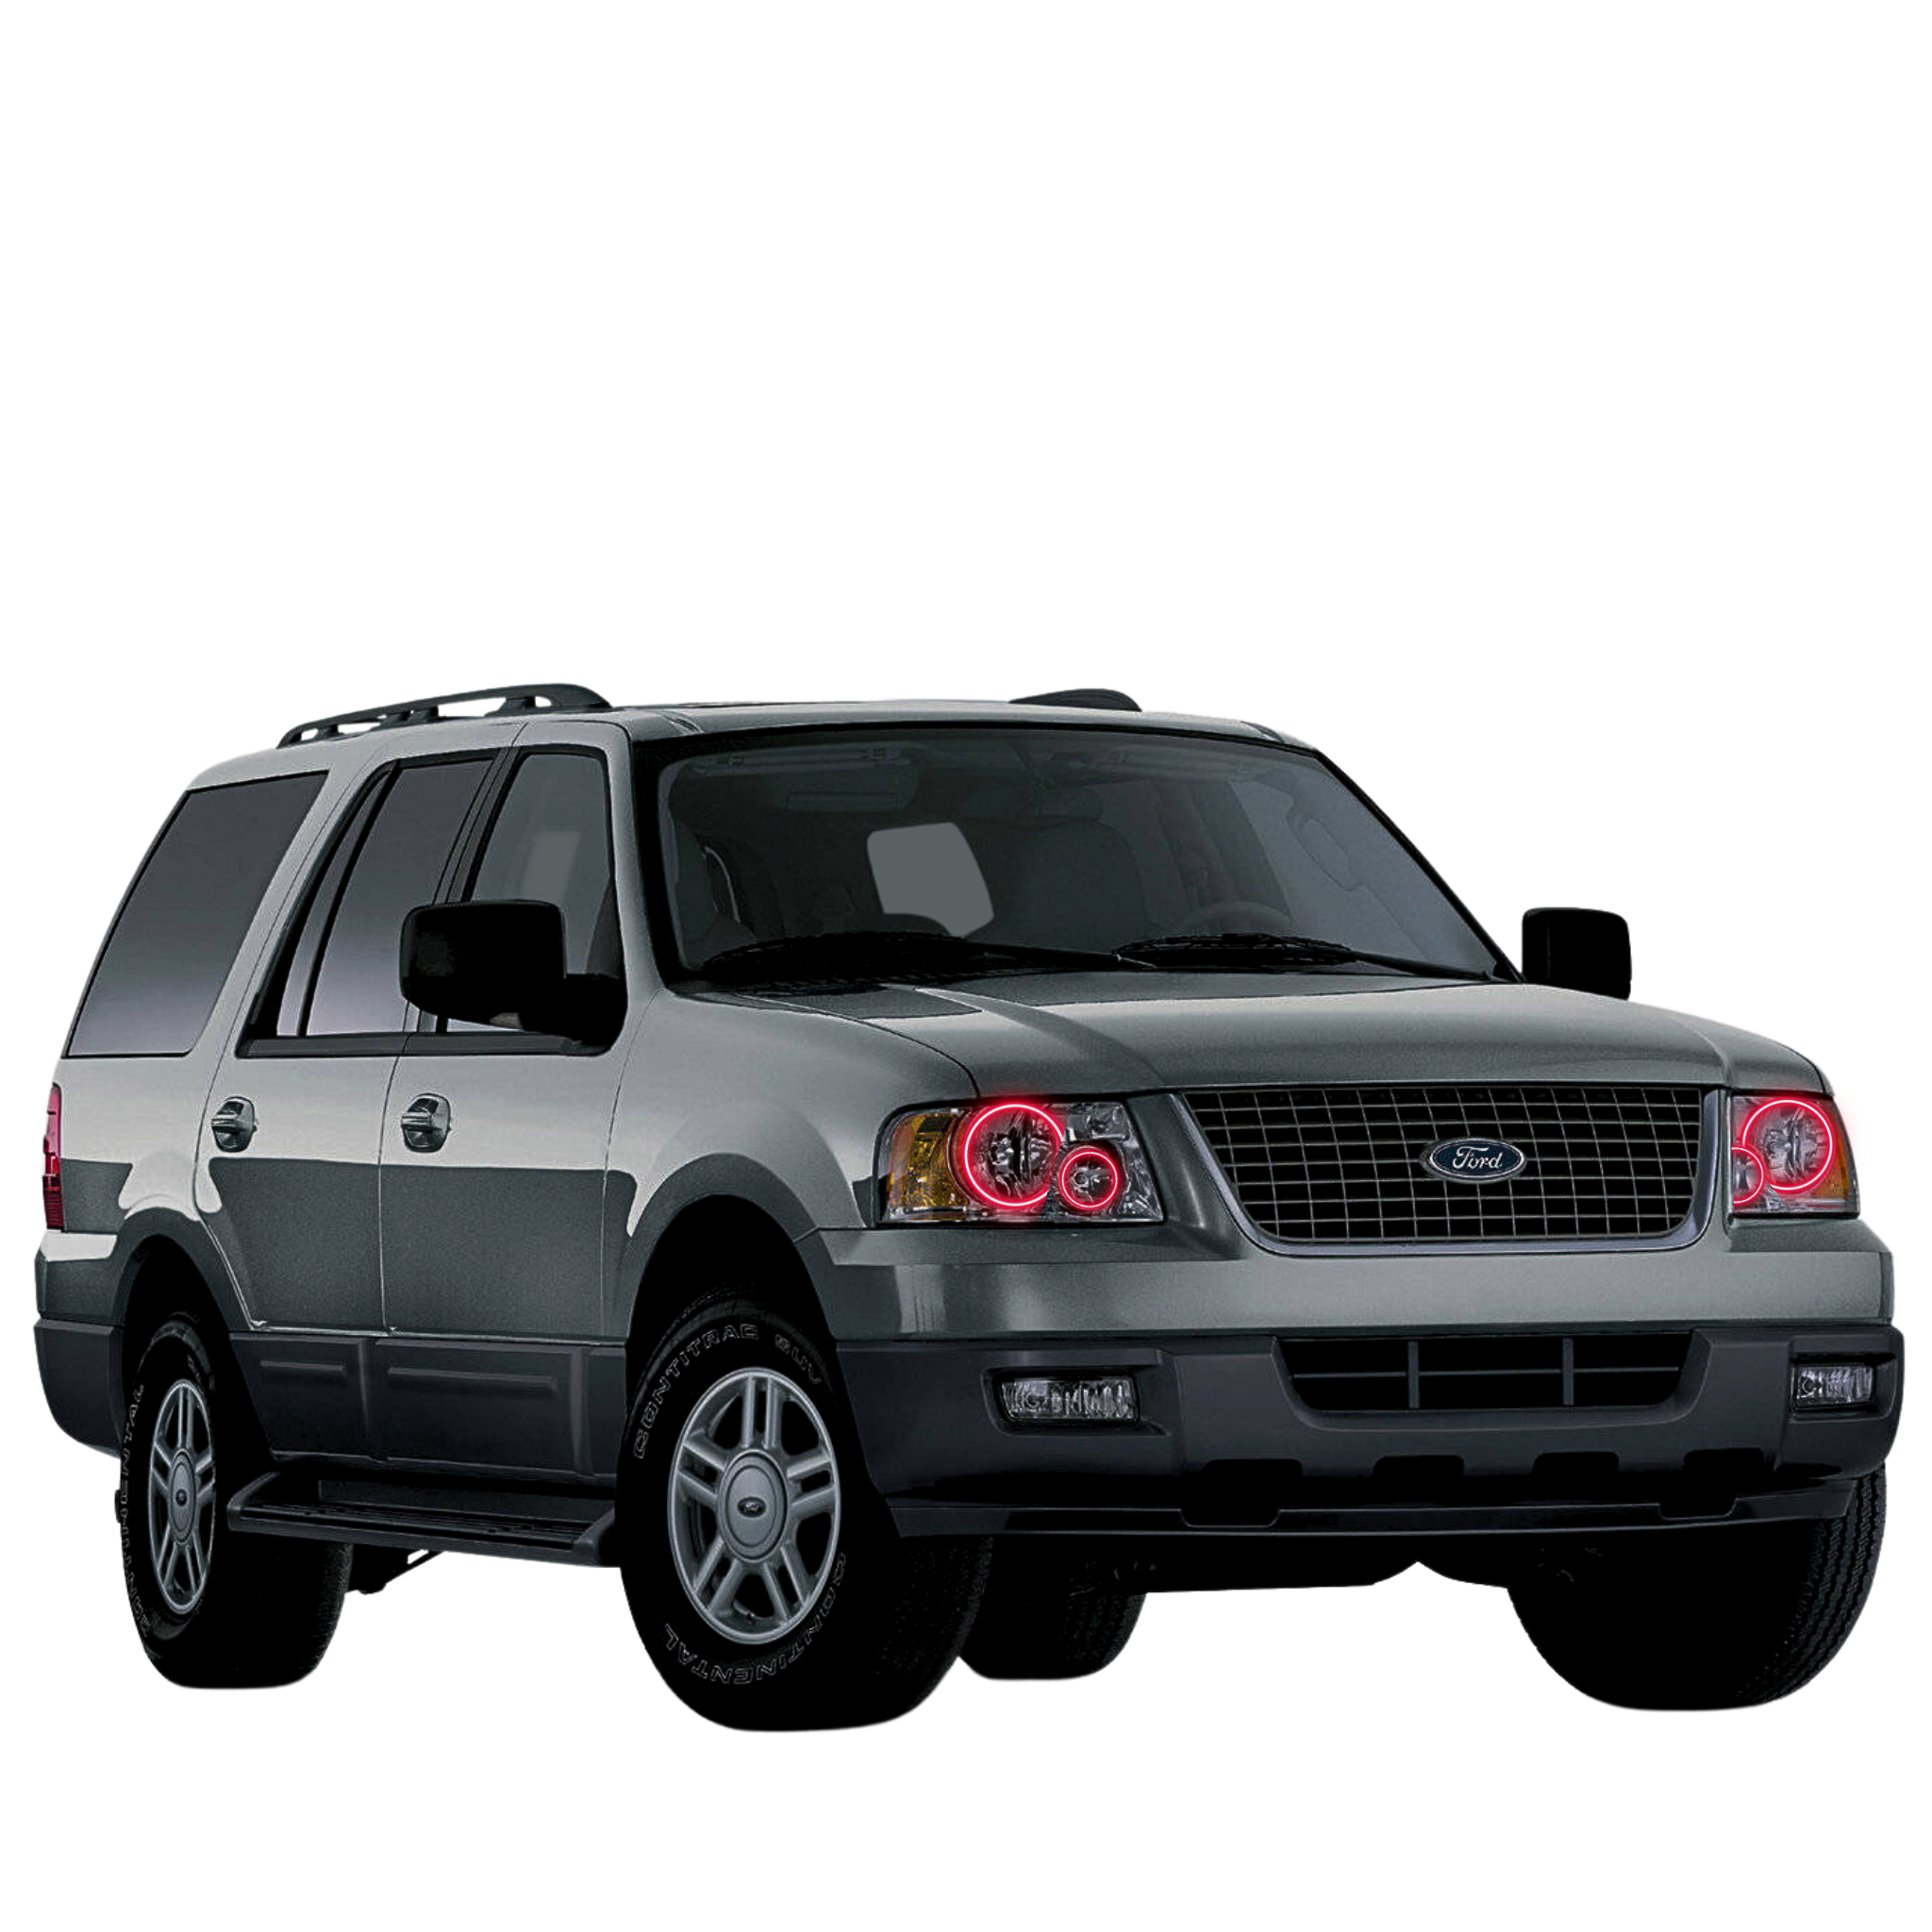 2003-2006 Ford Expedition Multicolor Halo Kit - RGB Halo Kits Multicolor Flow Series Color Chasing RGBWA LED headlight kit Colorshift Oracle Lighting Trendz OneUpLighting Morimoto theretrofitsource AutoLEDTech Diode Dynamics